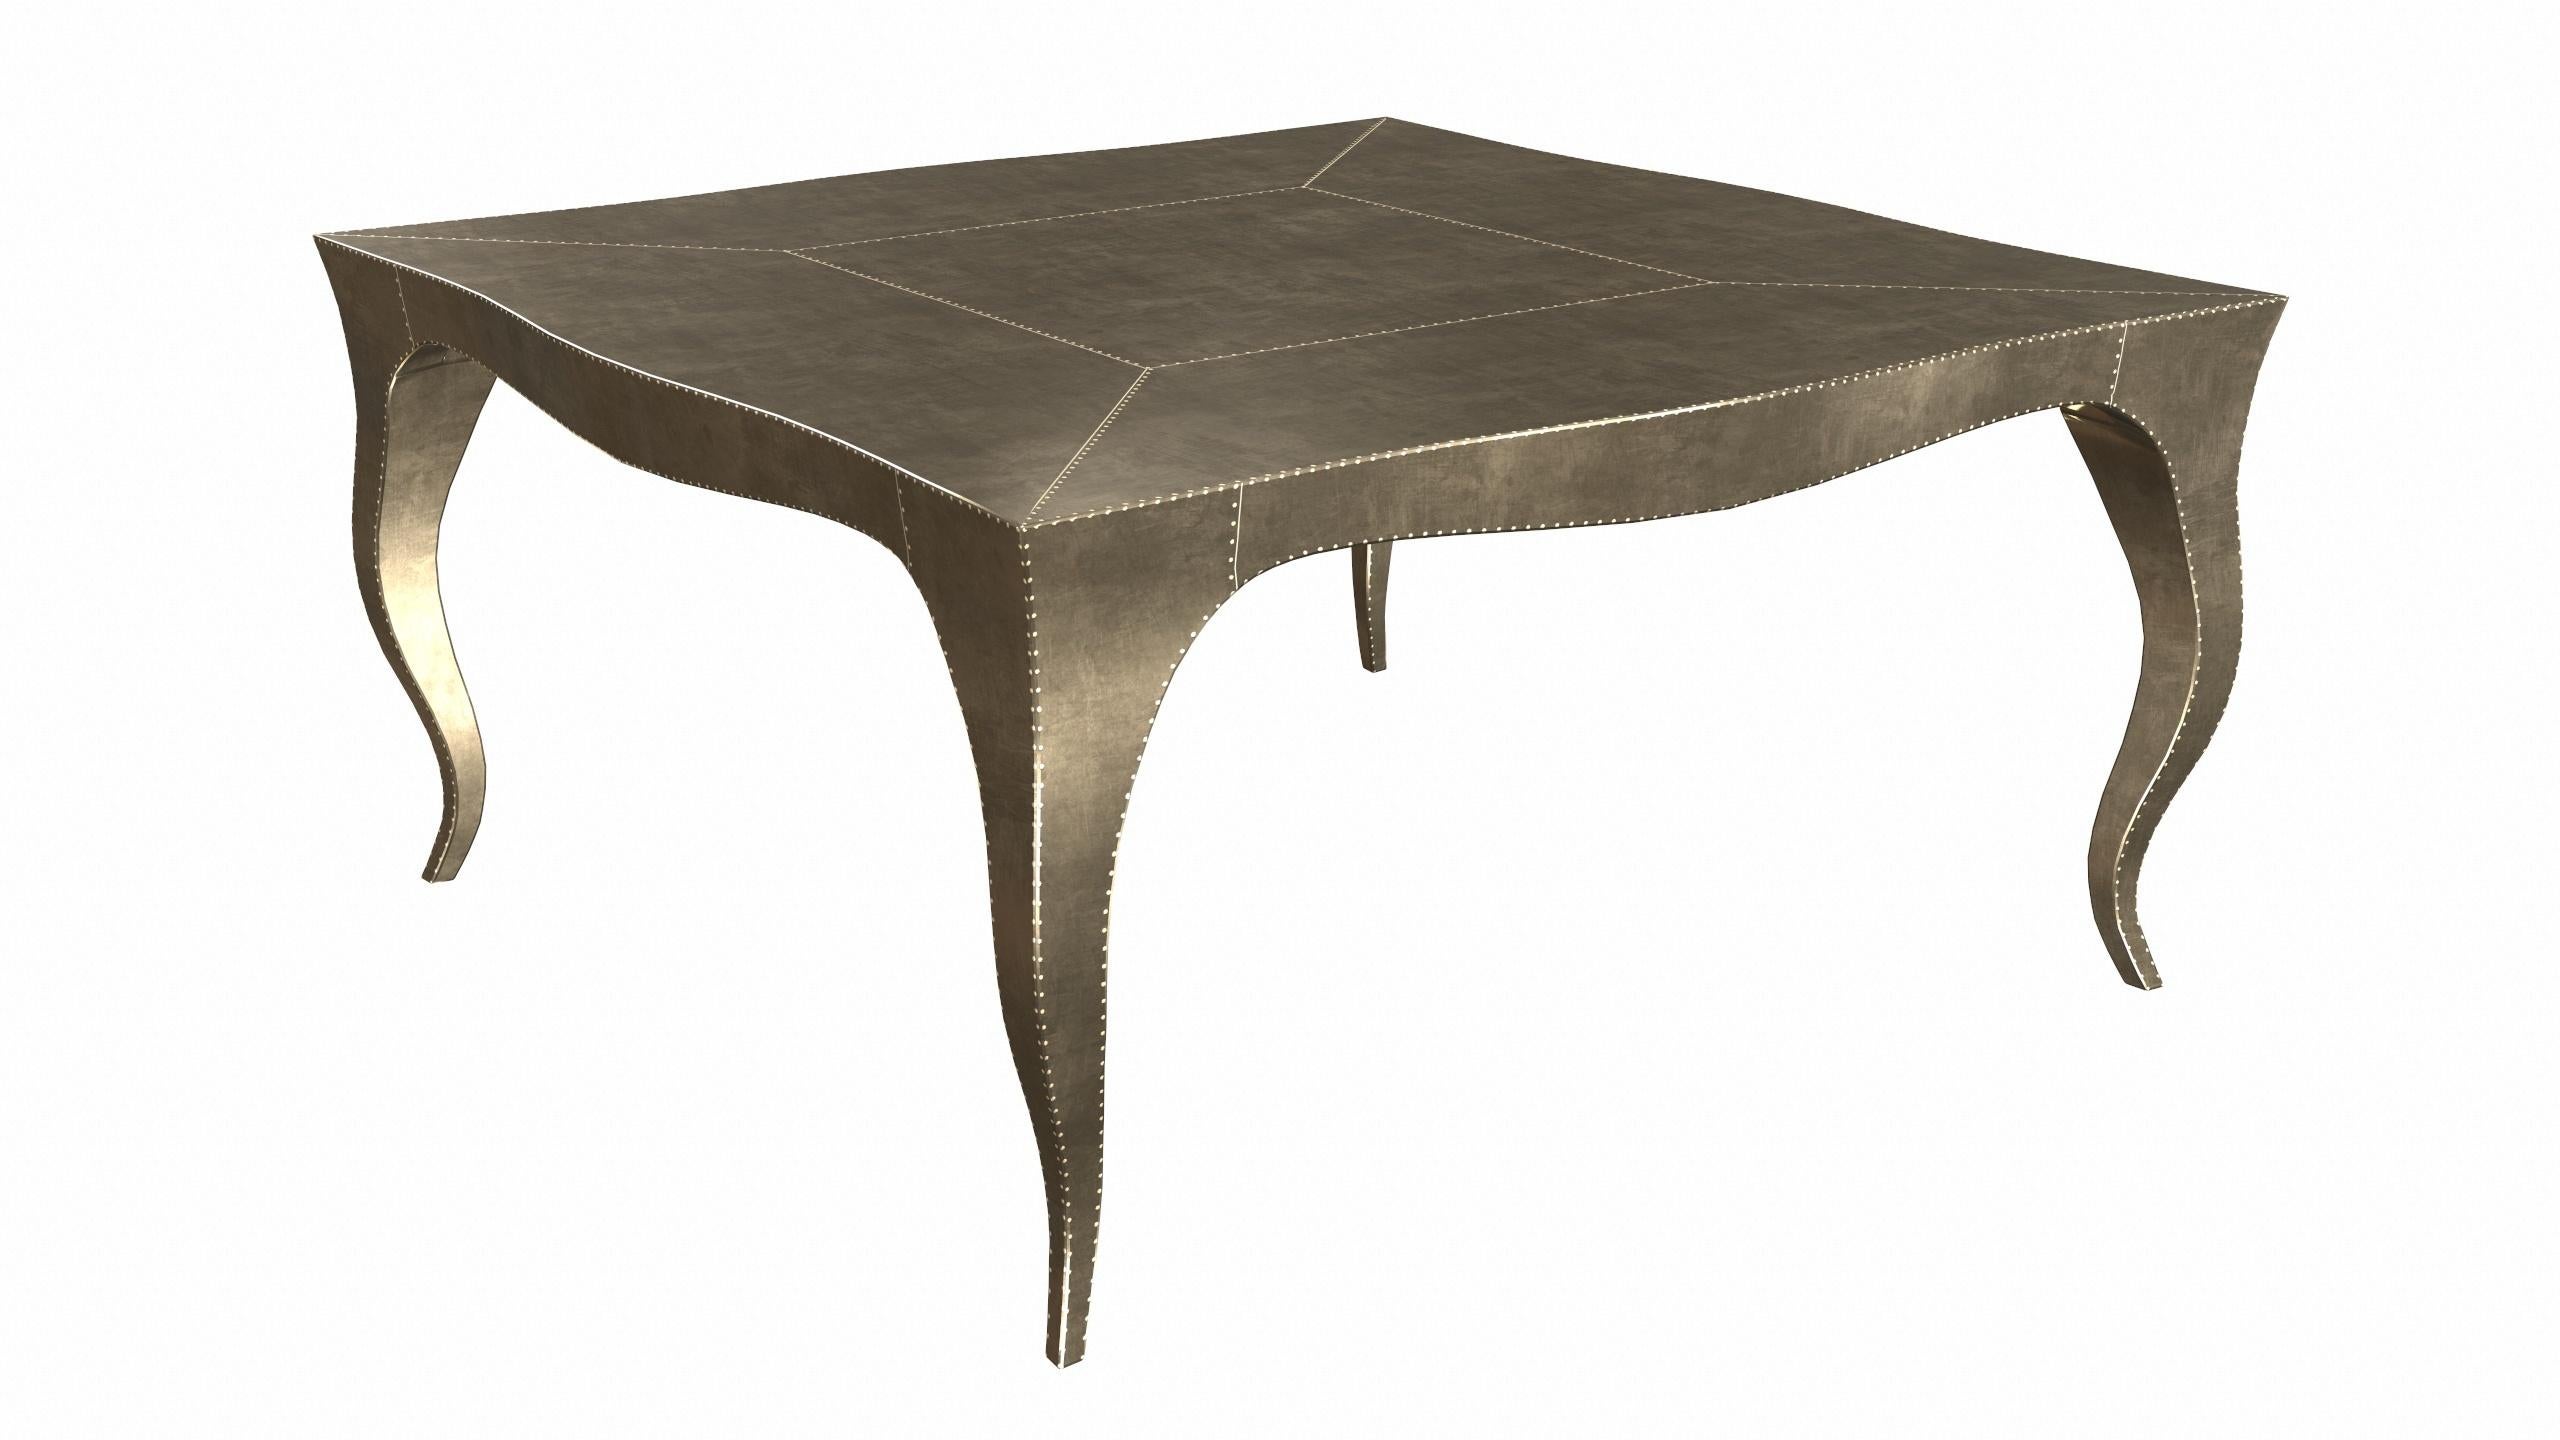 Louise Art Deco Coffee and Cocktail Tables Smooth Brass by Paul Mathieu Neuf - En vente à New York, NY